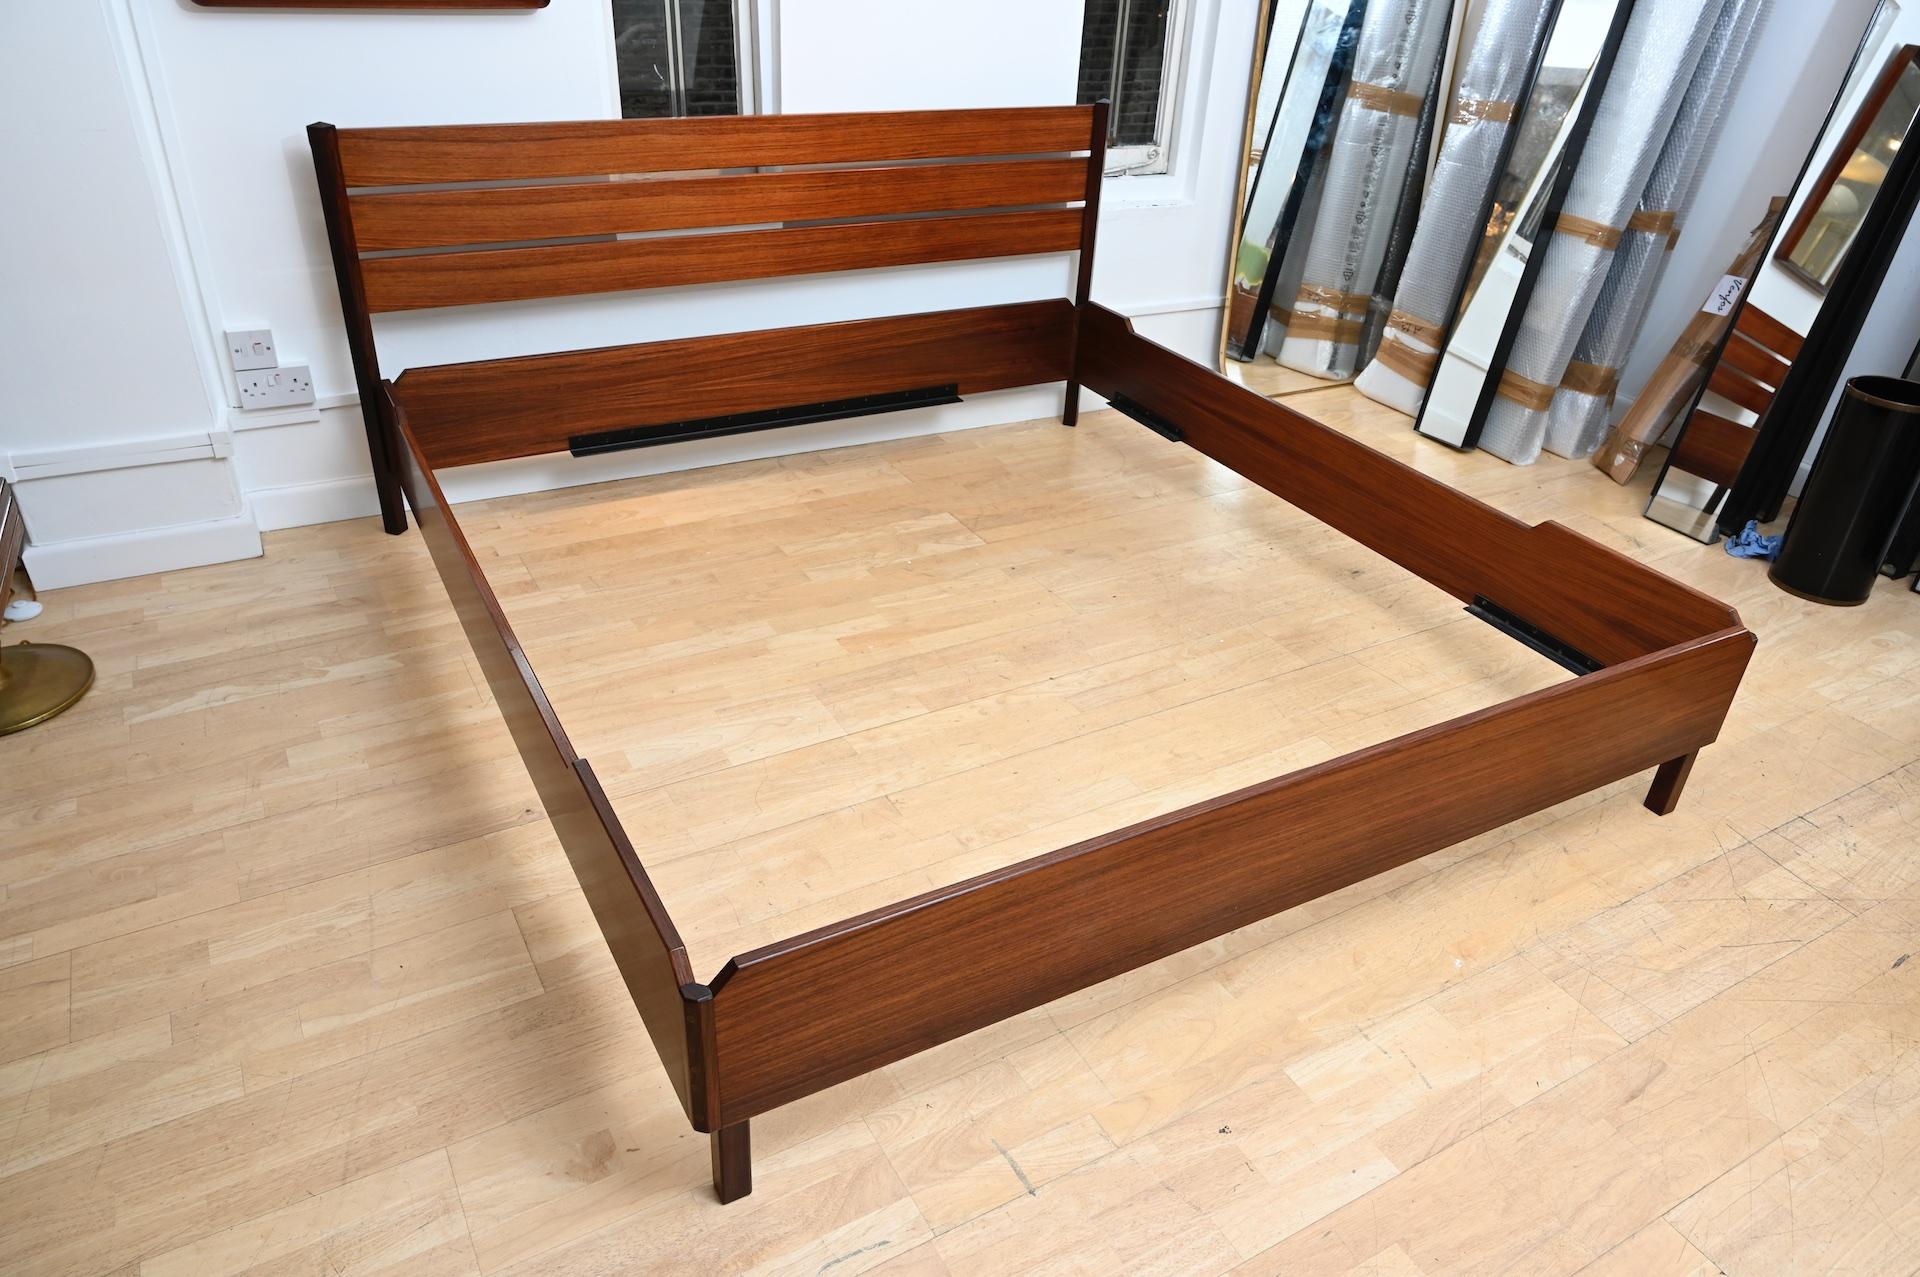 The bed is in fabulous condition having been faithfully restored.

The original springs to this bed are available and in excellent condition. It is mattress ready!